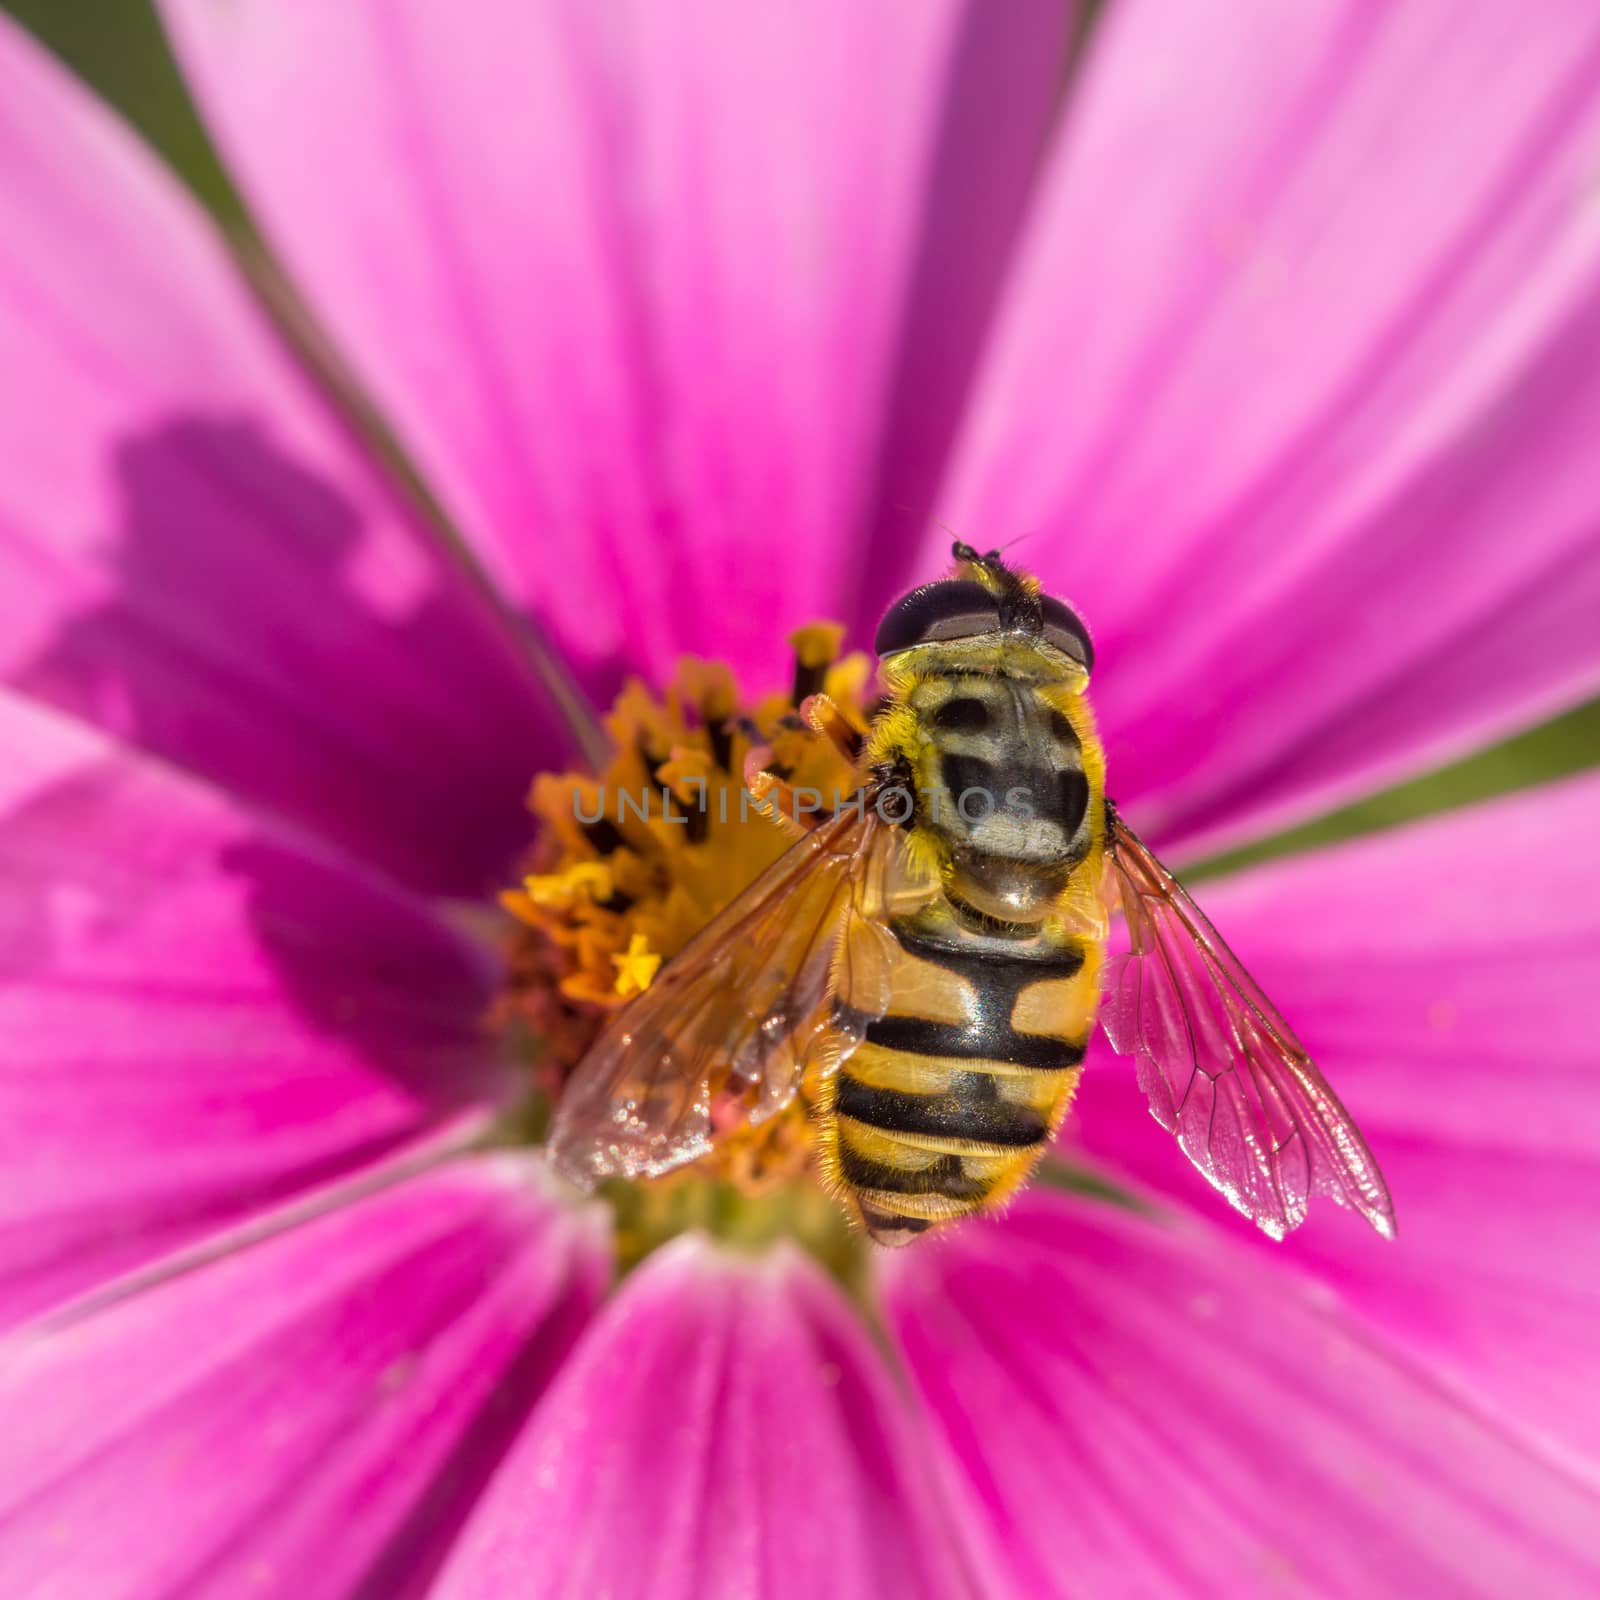 Top view of a wasp resting on a pink flower